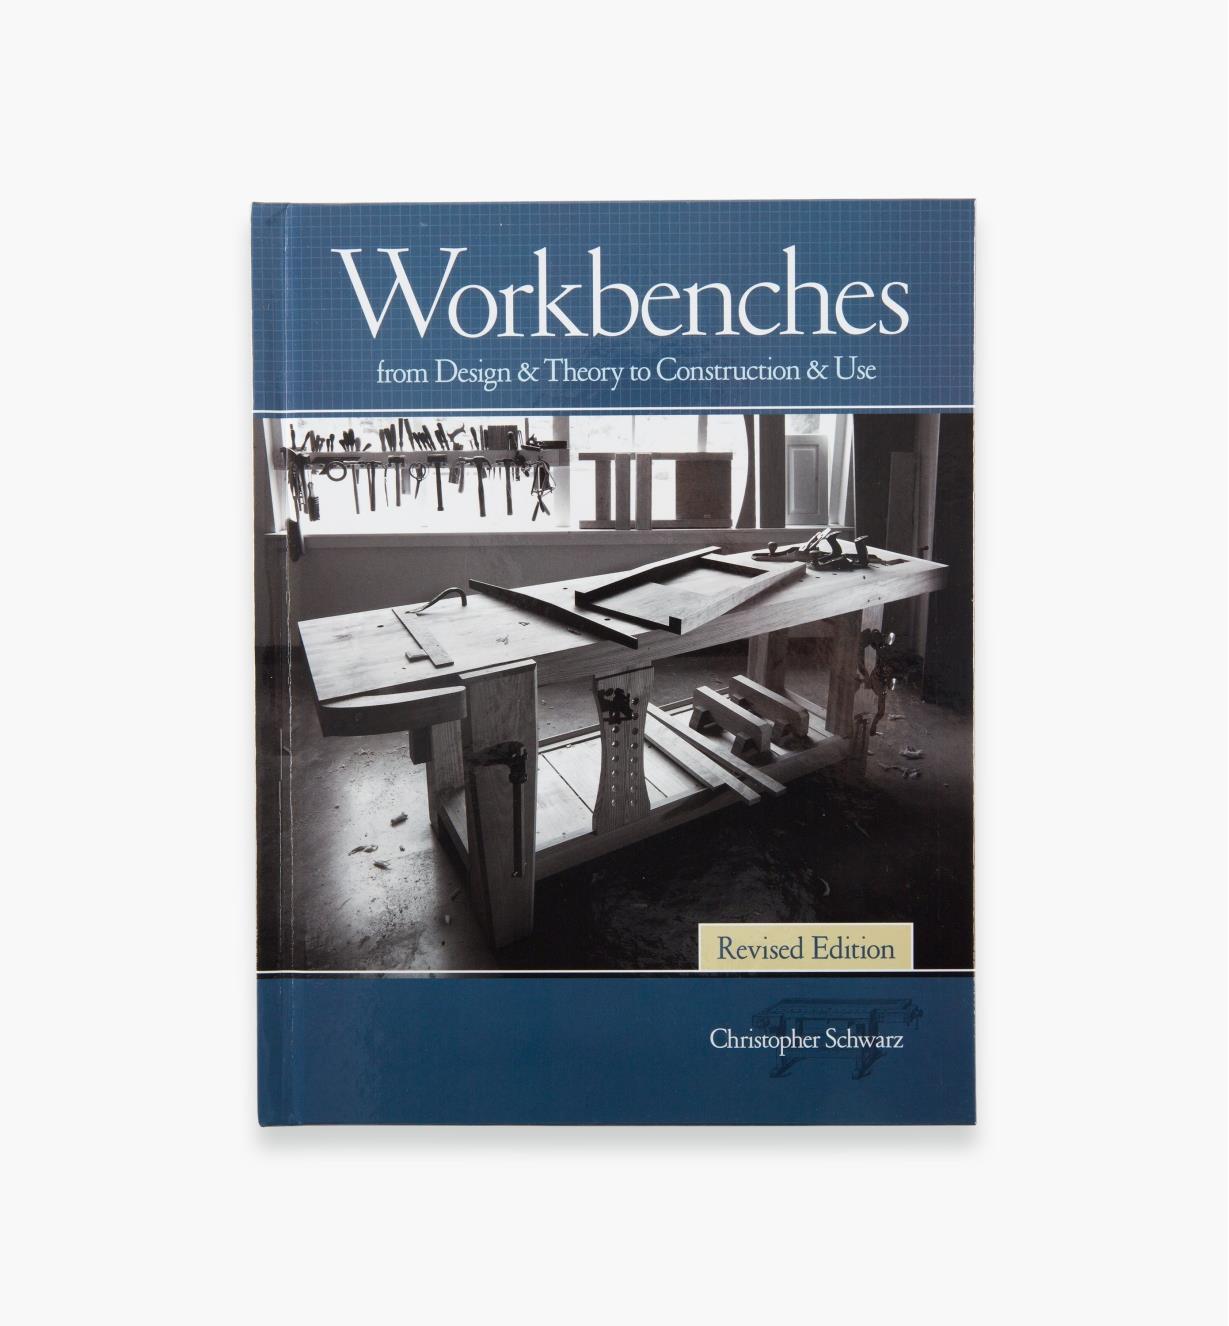 20L0290 - Workbenches from Design & Theory to Construction & Use – Revised Edition